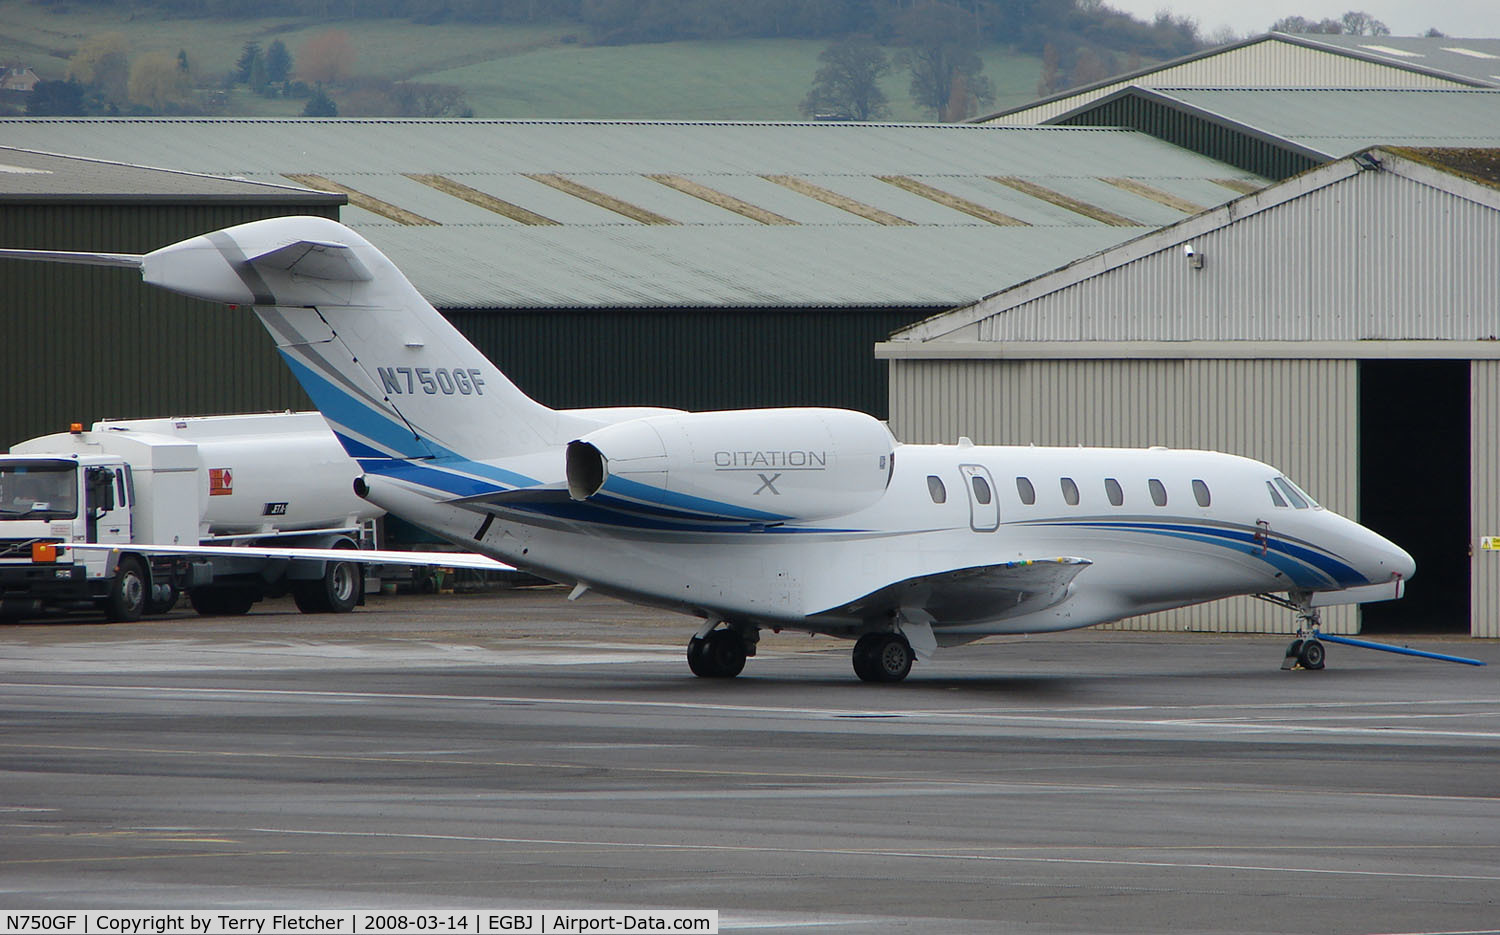 N750GF, 2005 Cessna 750 Citation X C/N 750-0244, This Citation 750 is based at Gloucestershire Airport